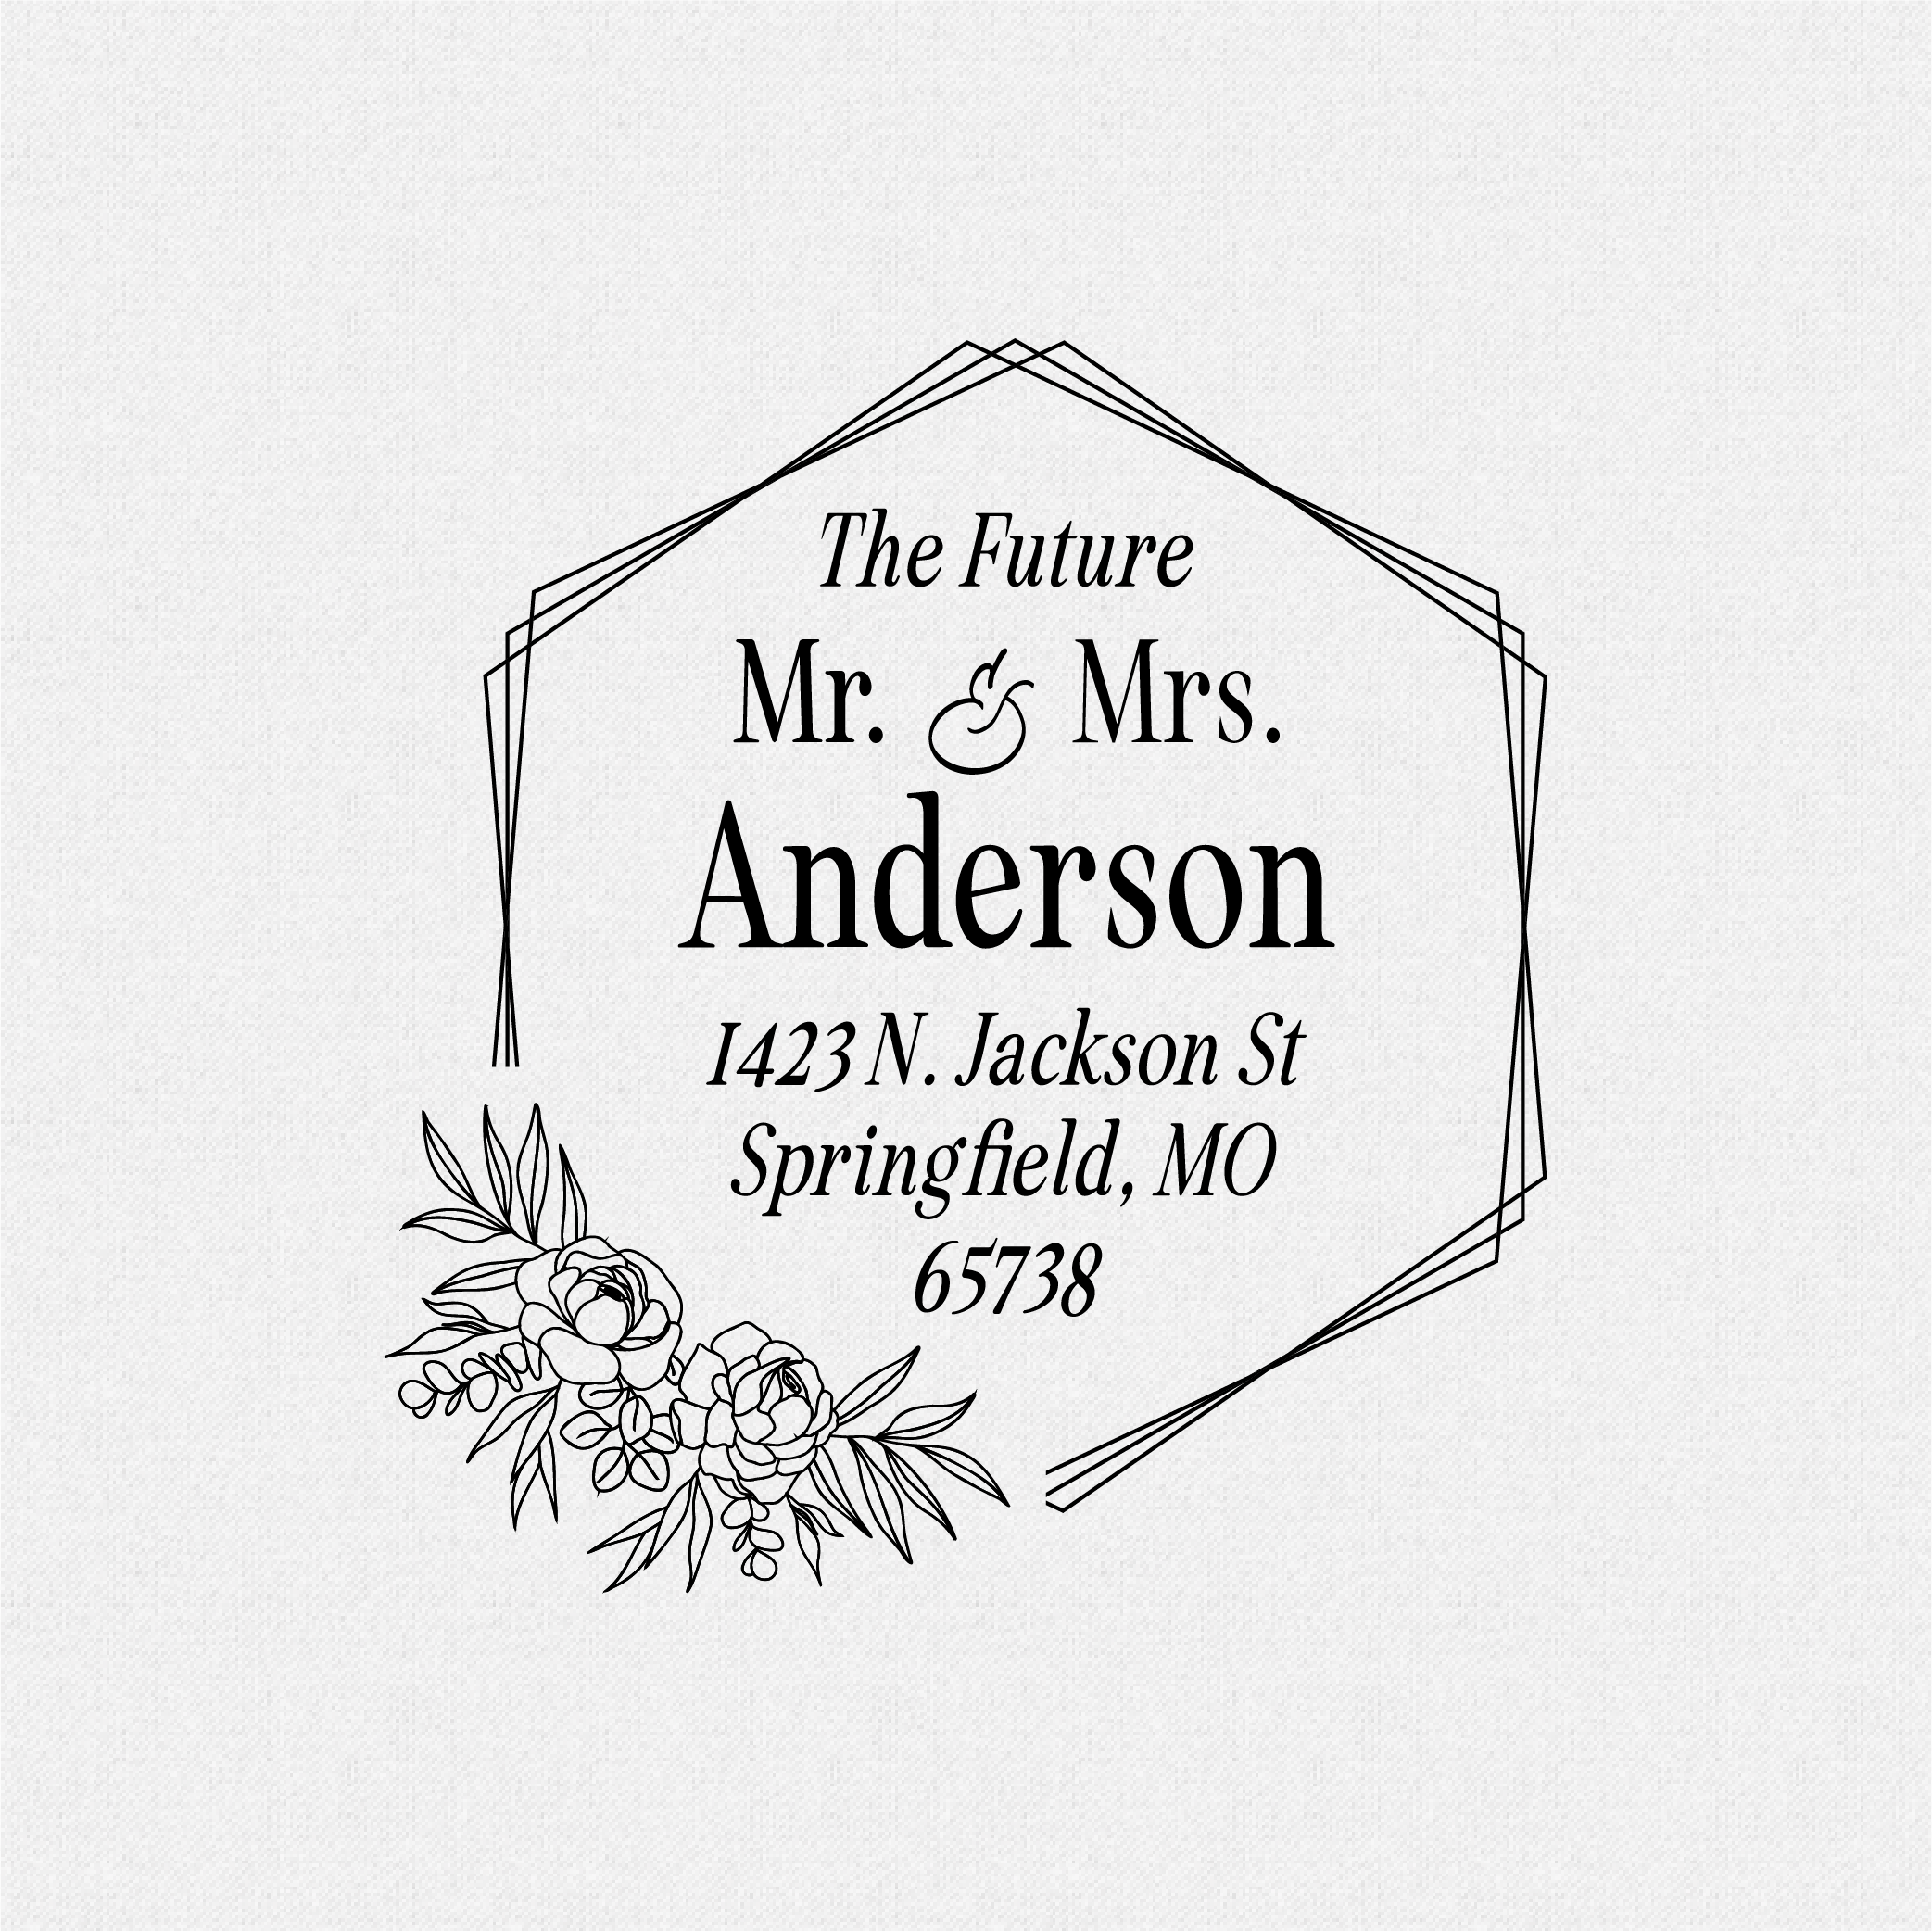 Personalized The Future Mr. & Mrs Wedding Invitation Rubber Stamp with Hexagon and Peonies Self Inking - Style T#531